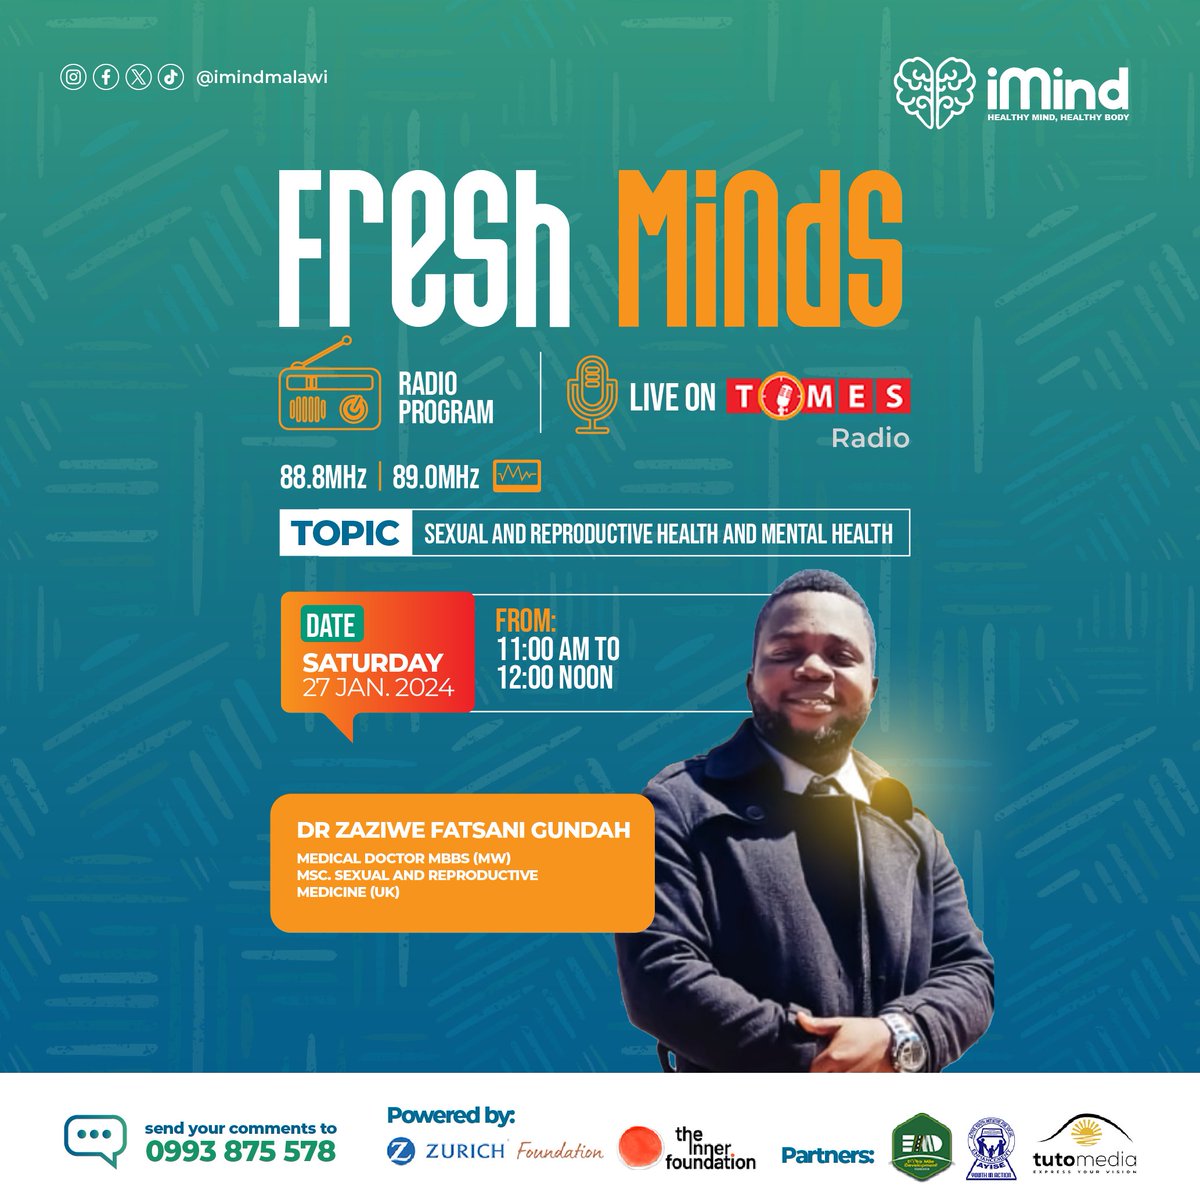 We are almost winding down with Fresh Minds Radio Program Season 3. Make sure you tune in to Times Radio tomorrow at 11 am CAT.

#sexualandreproductivehealth
#mentalhealthmatters
#FreshMinds